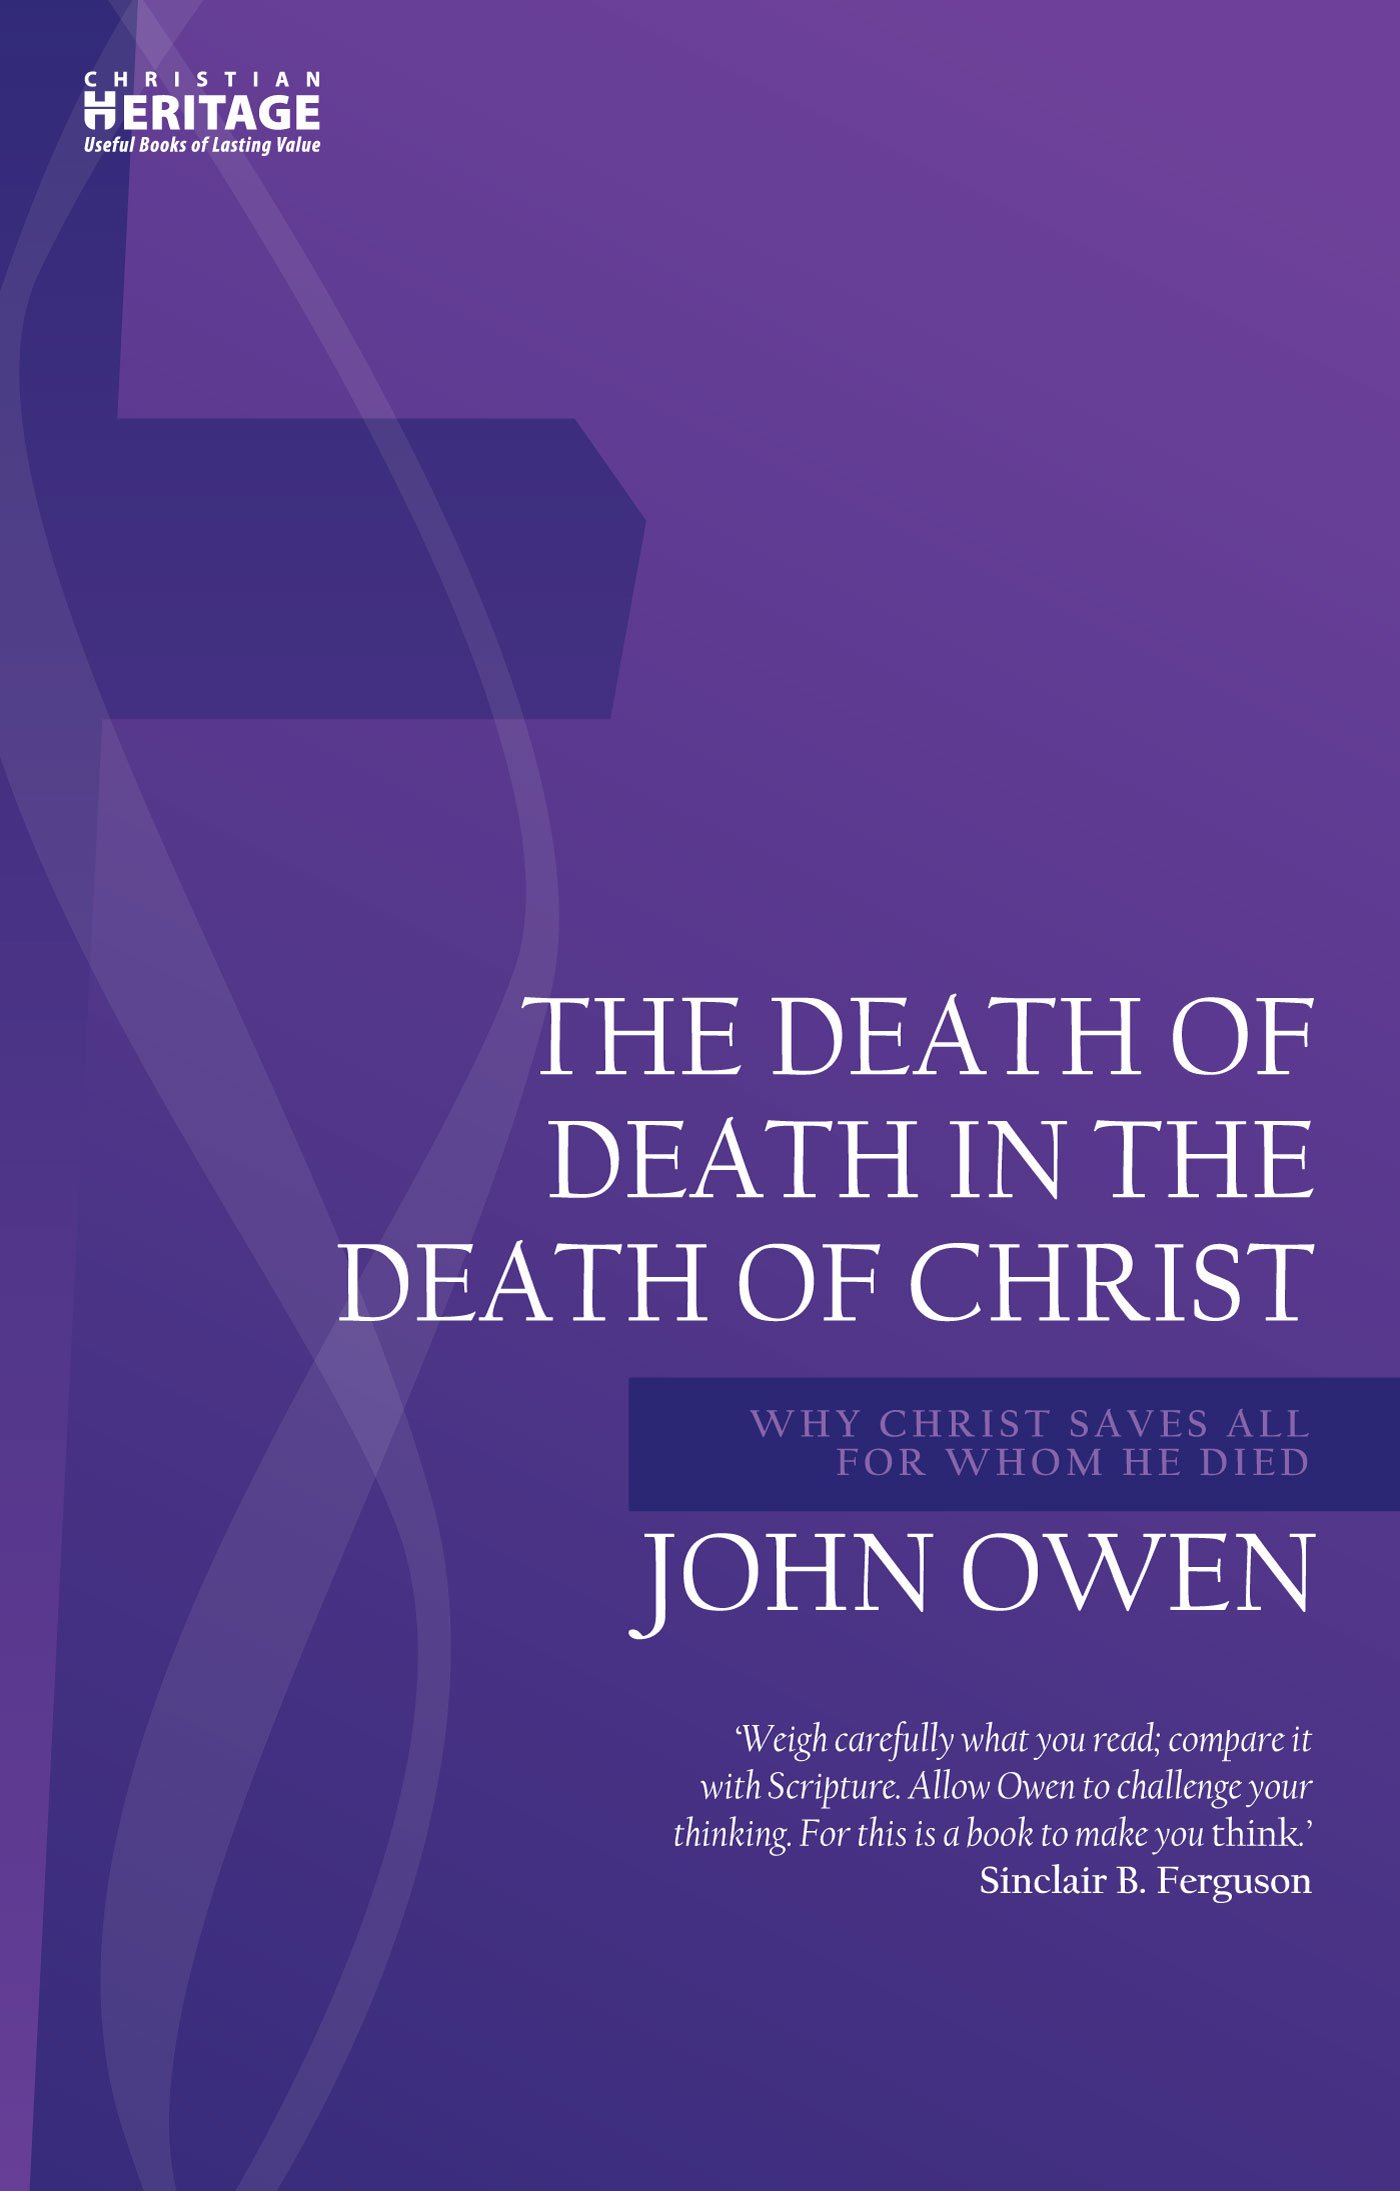 Book Notice: THE DEATH OF DEATH IN THE DEATH OF CHRIST: WHY CHRIST SAVES ALL FOR WHOM HE DIED, by John Owen, with Introduction by Sinclair Ferguson